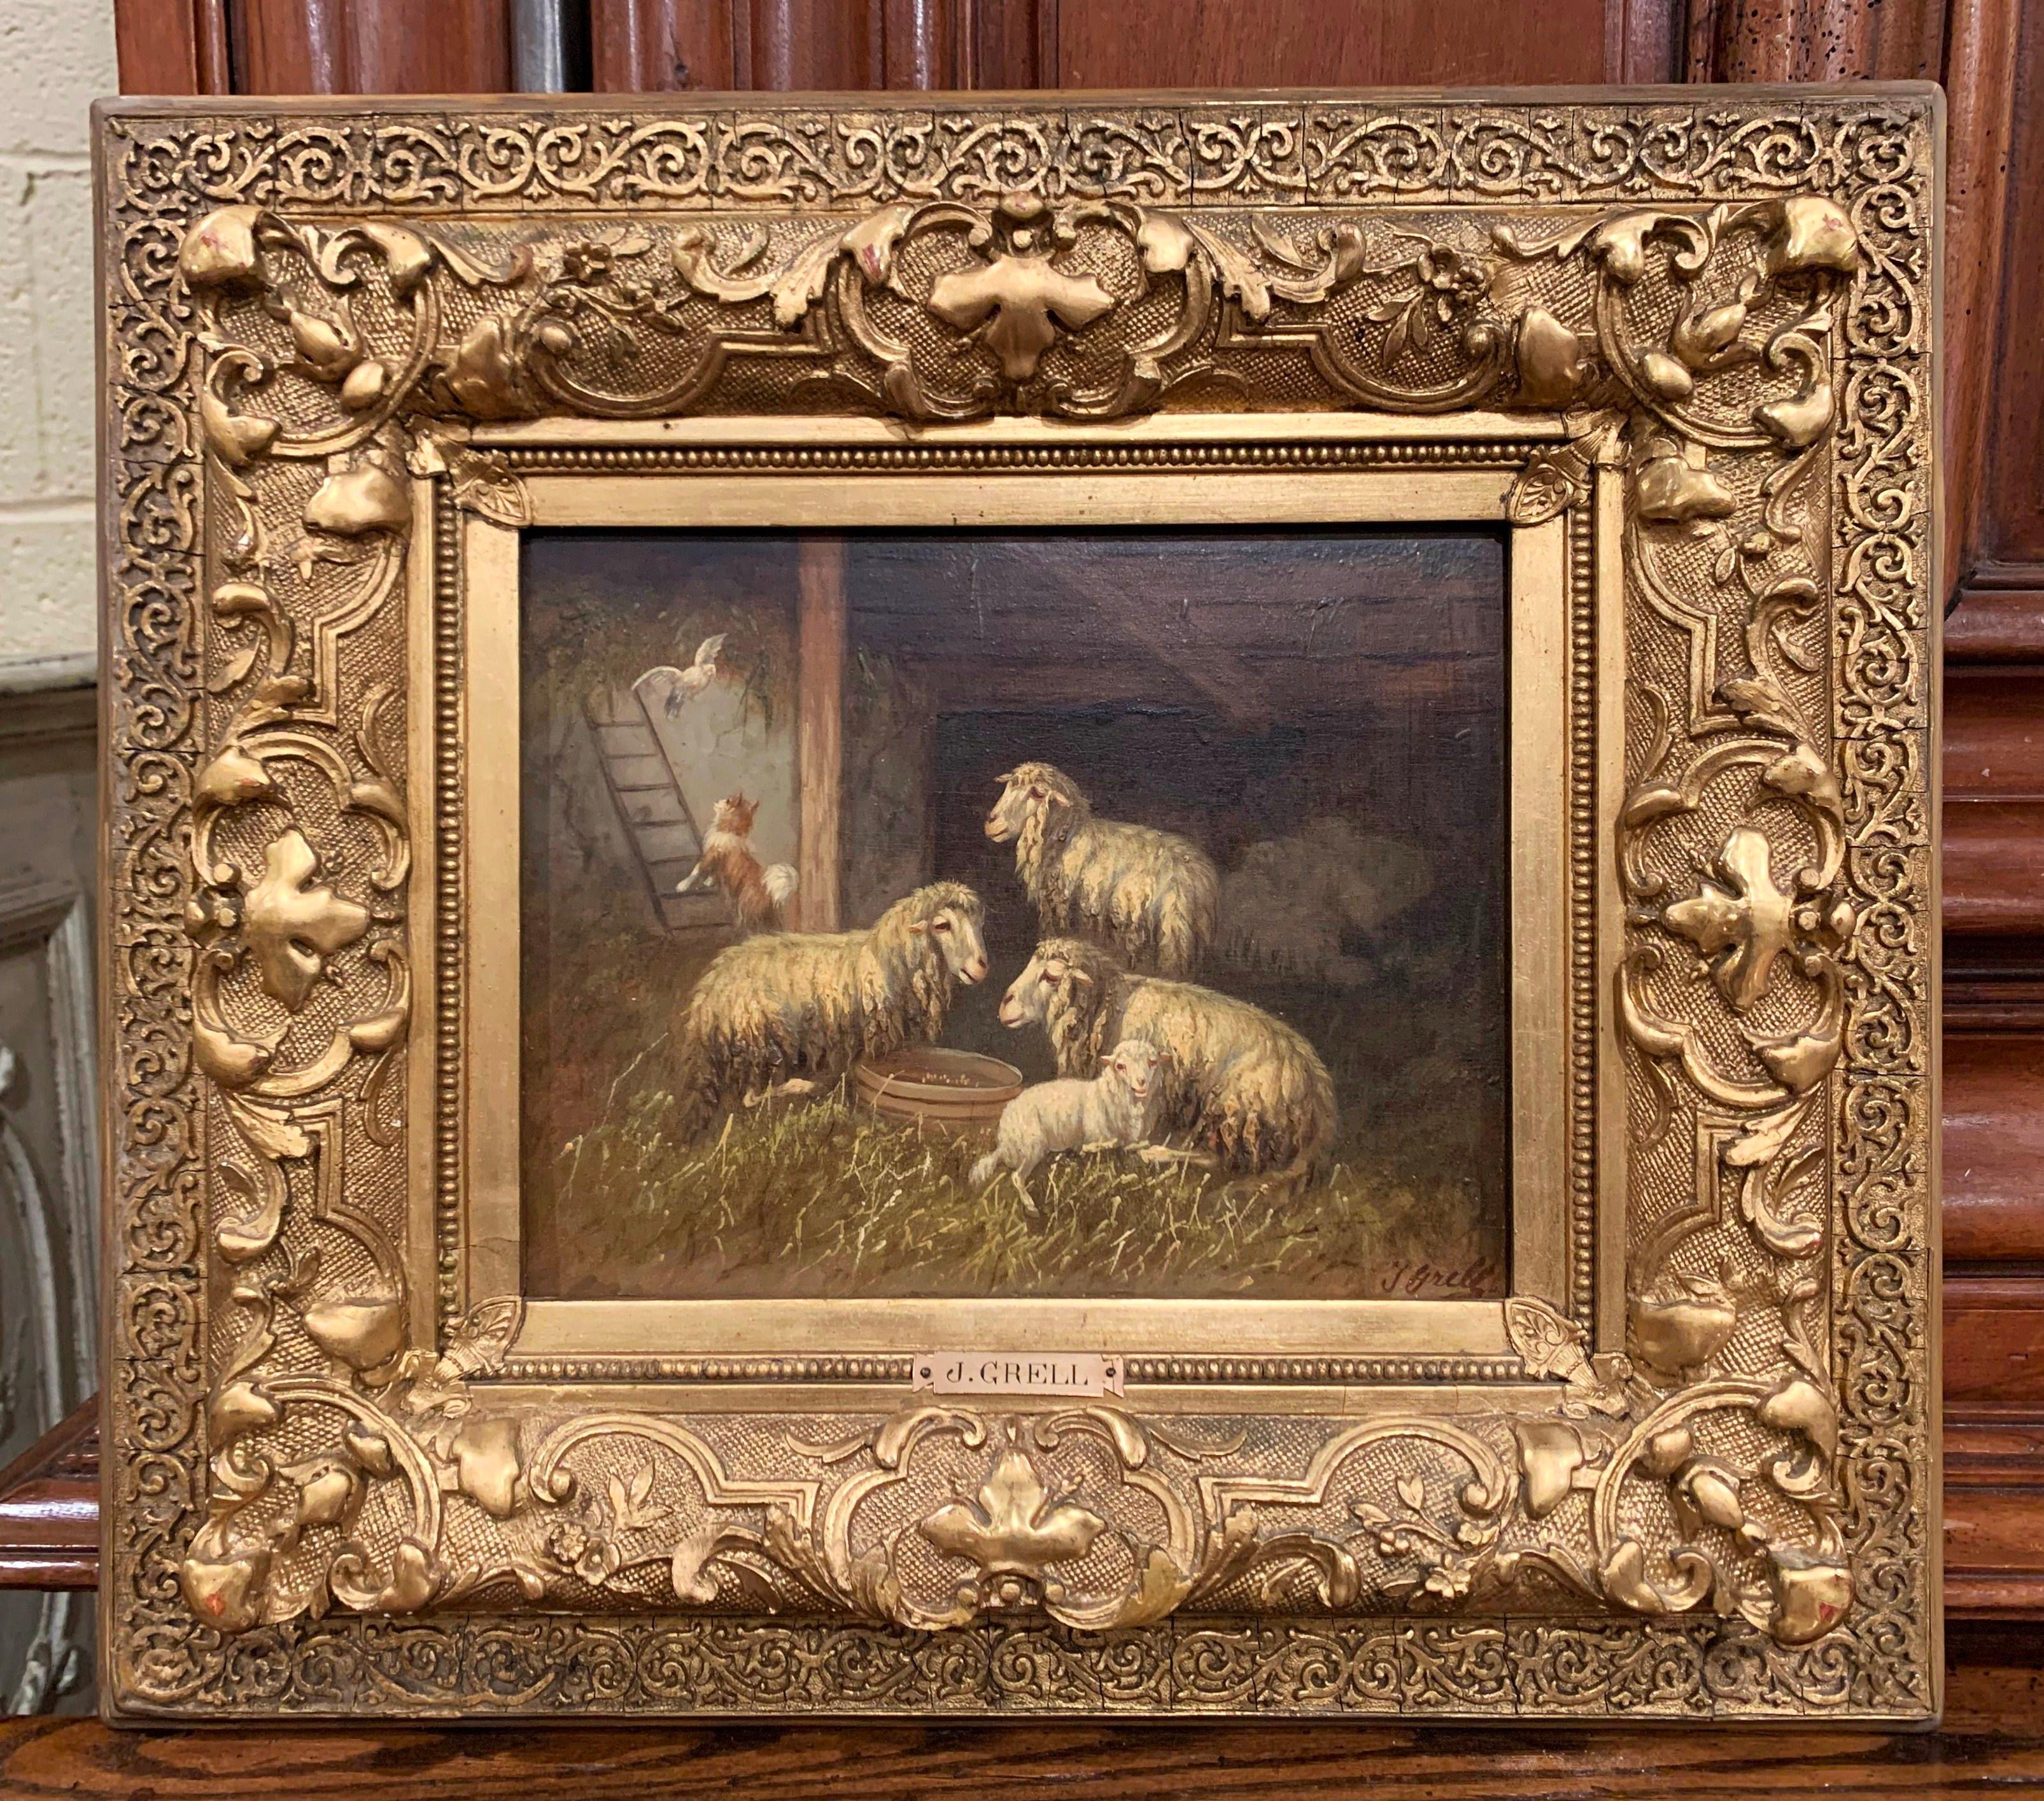 Austrian 19th Century Sheep and Ram Painting in Carved Gilt Frame Signed Johanna Grell